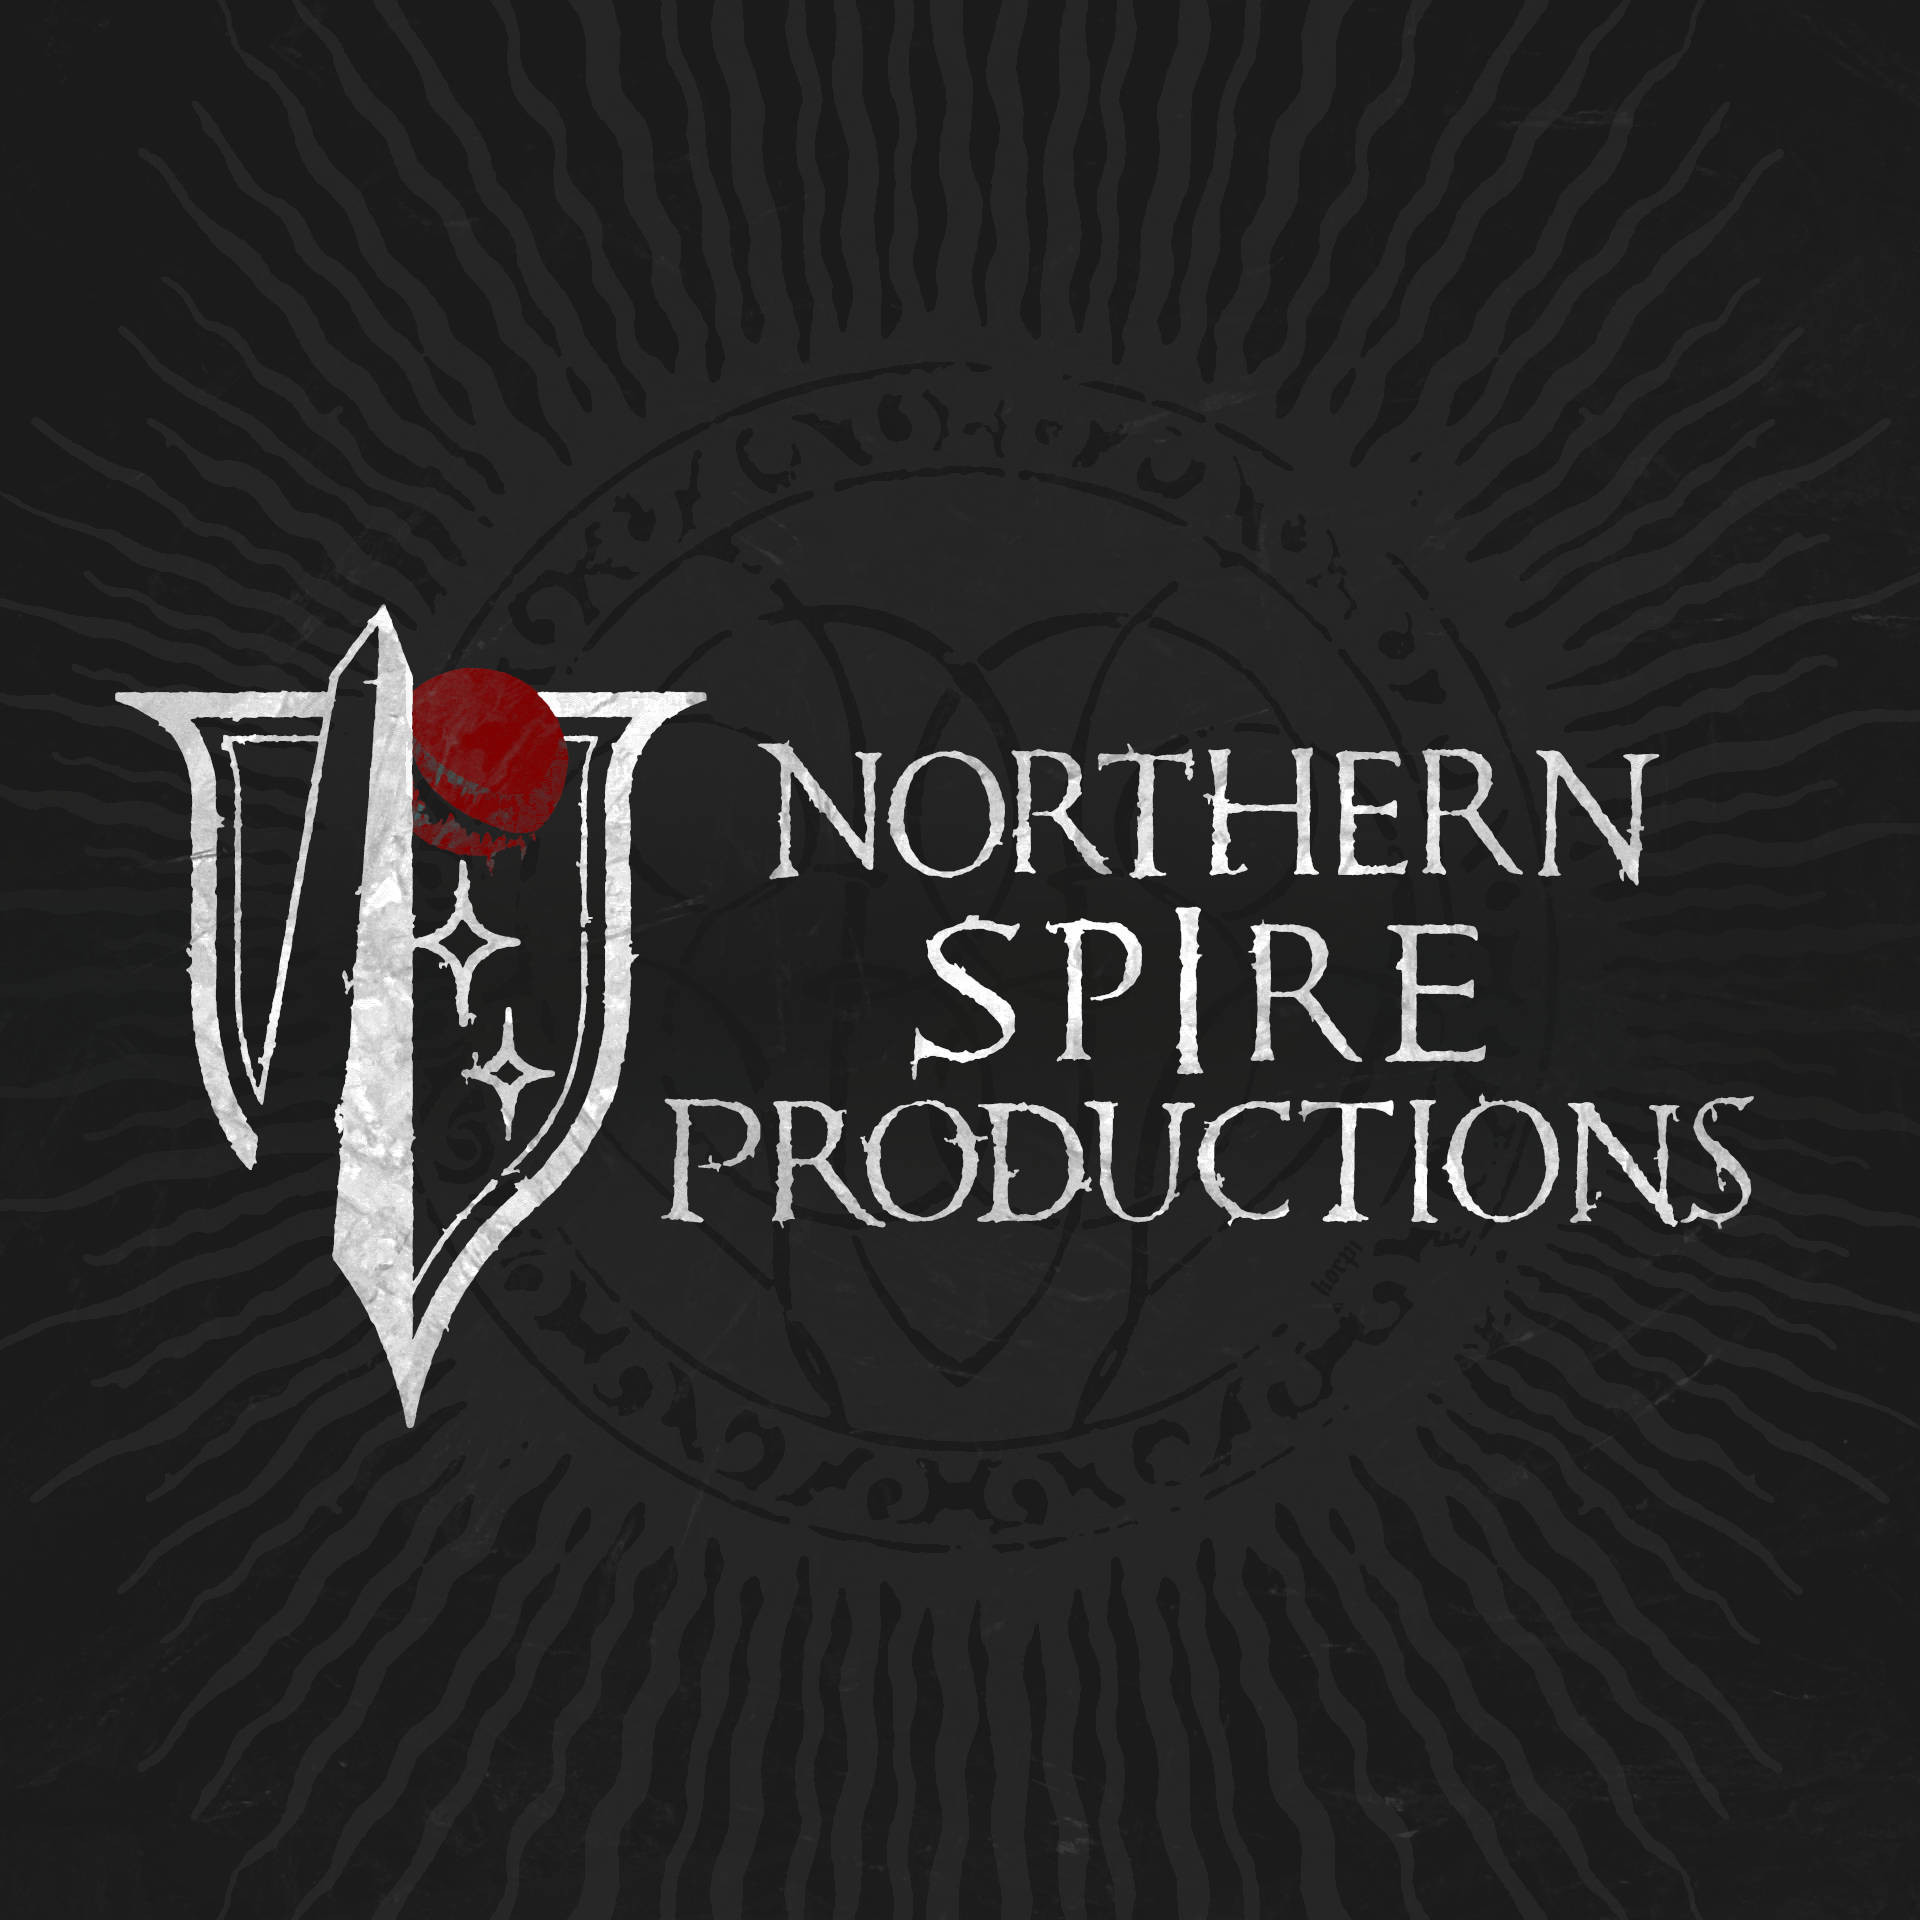 Northern Spire Productions record label logo on background.